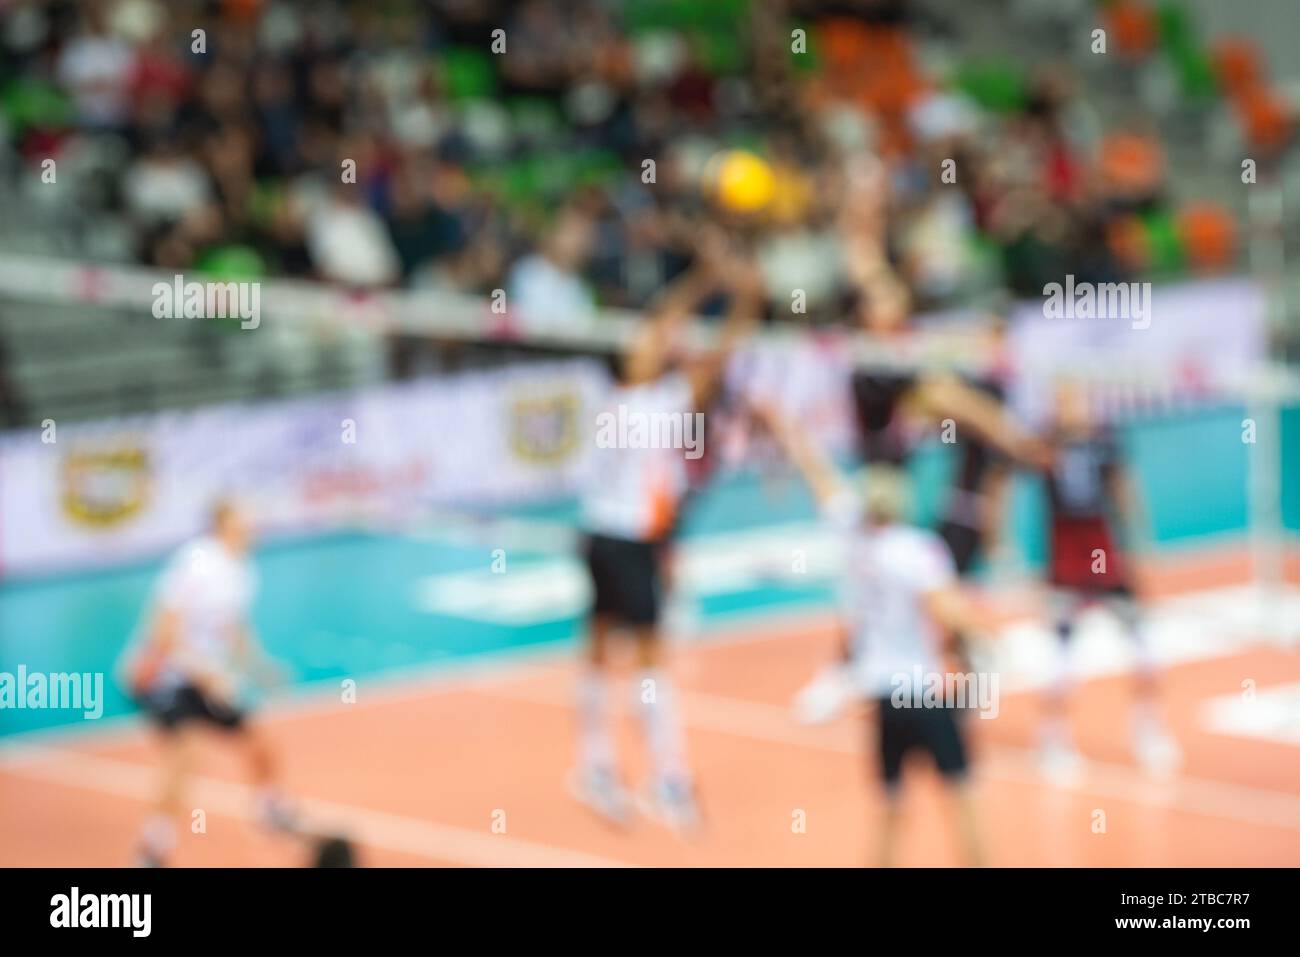 volleyball match - intentional blurred picture Stock Photo